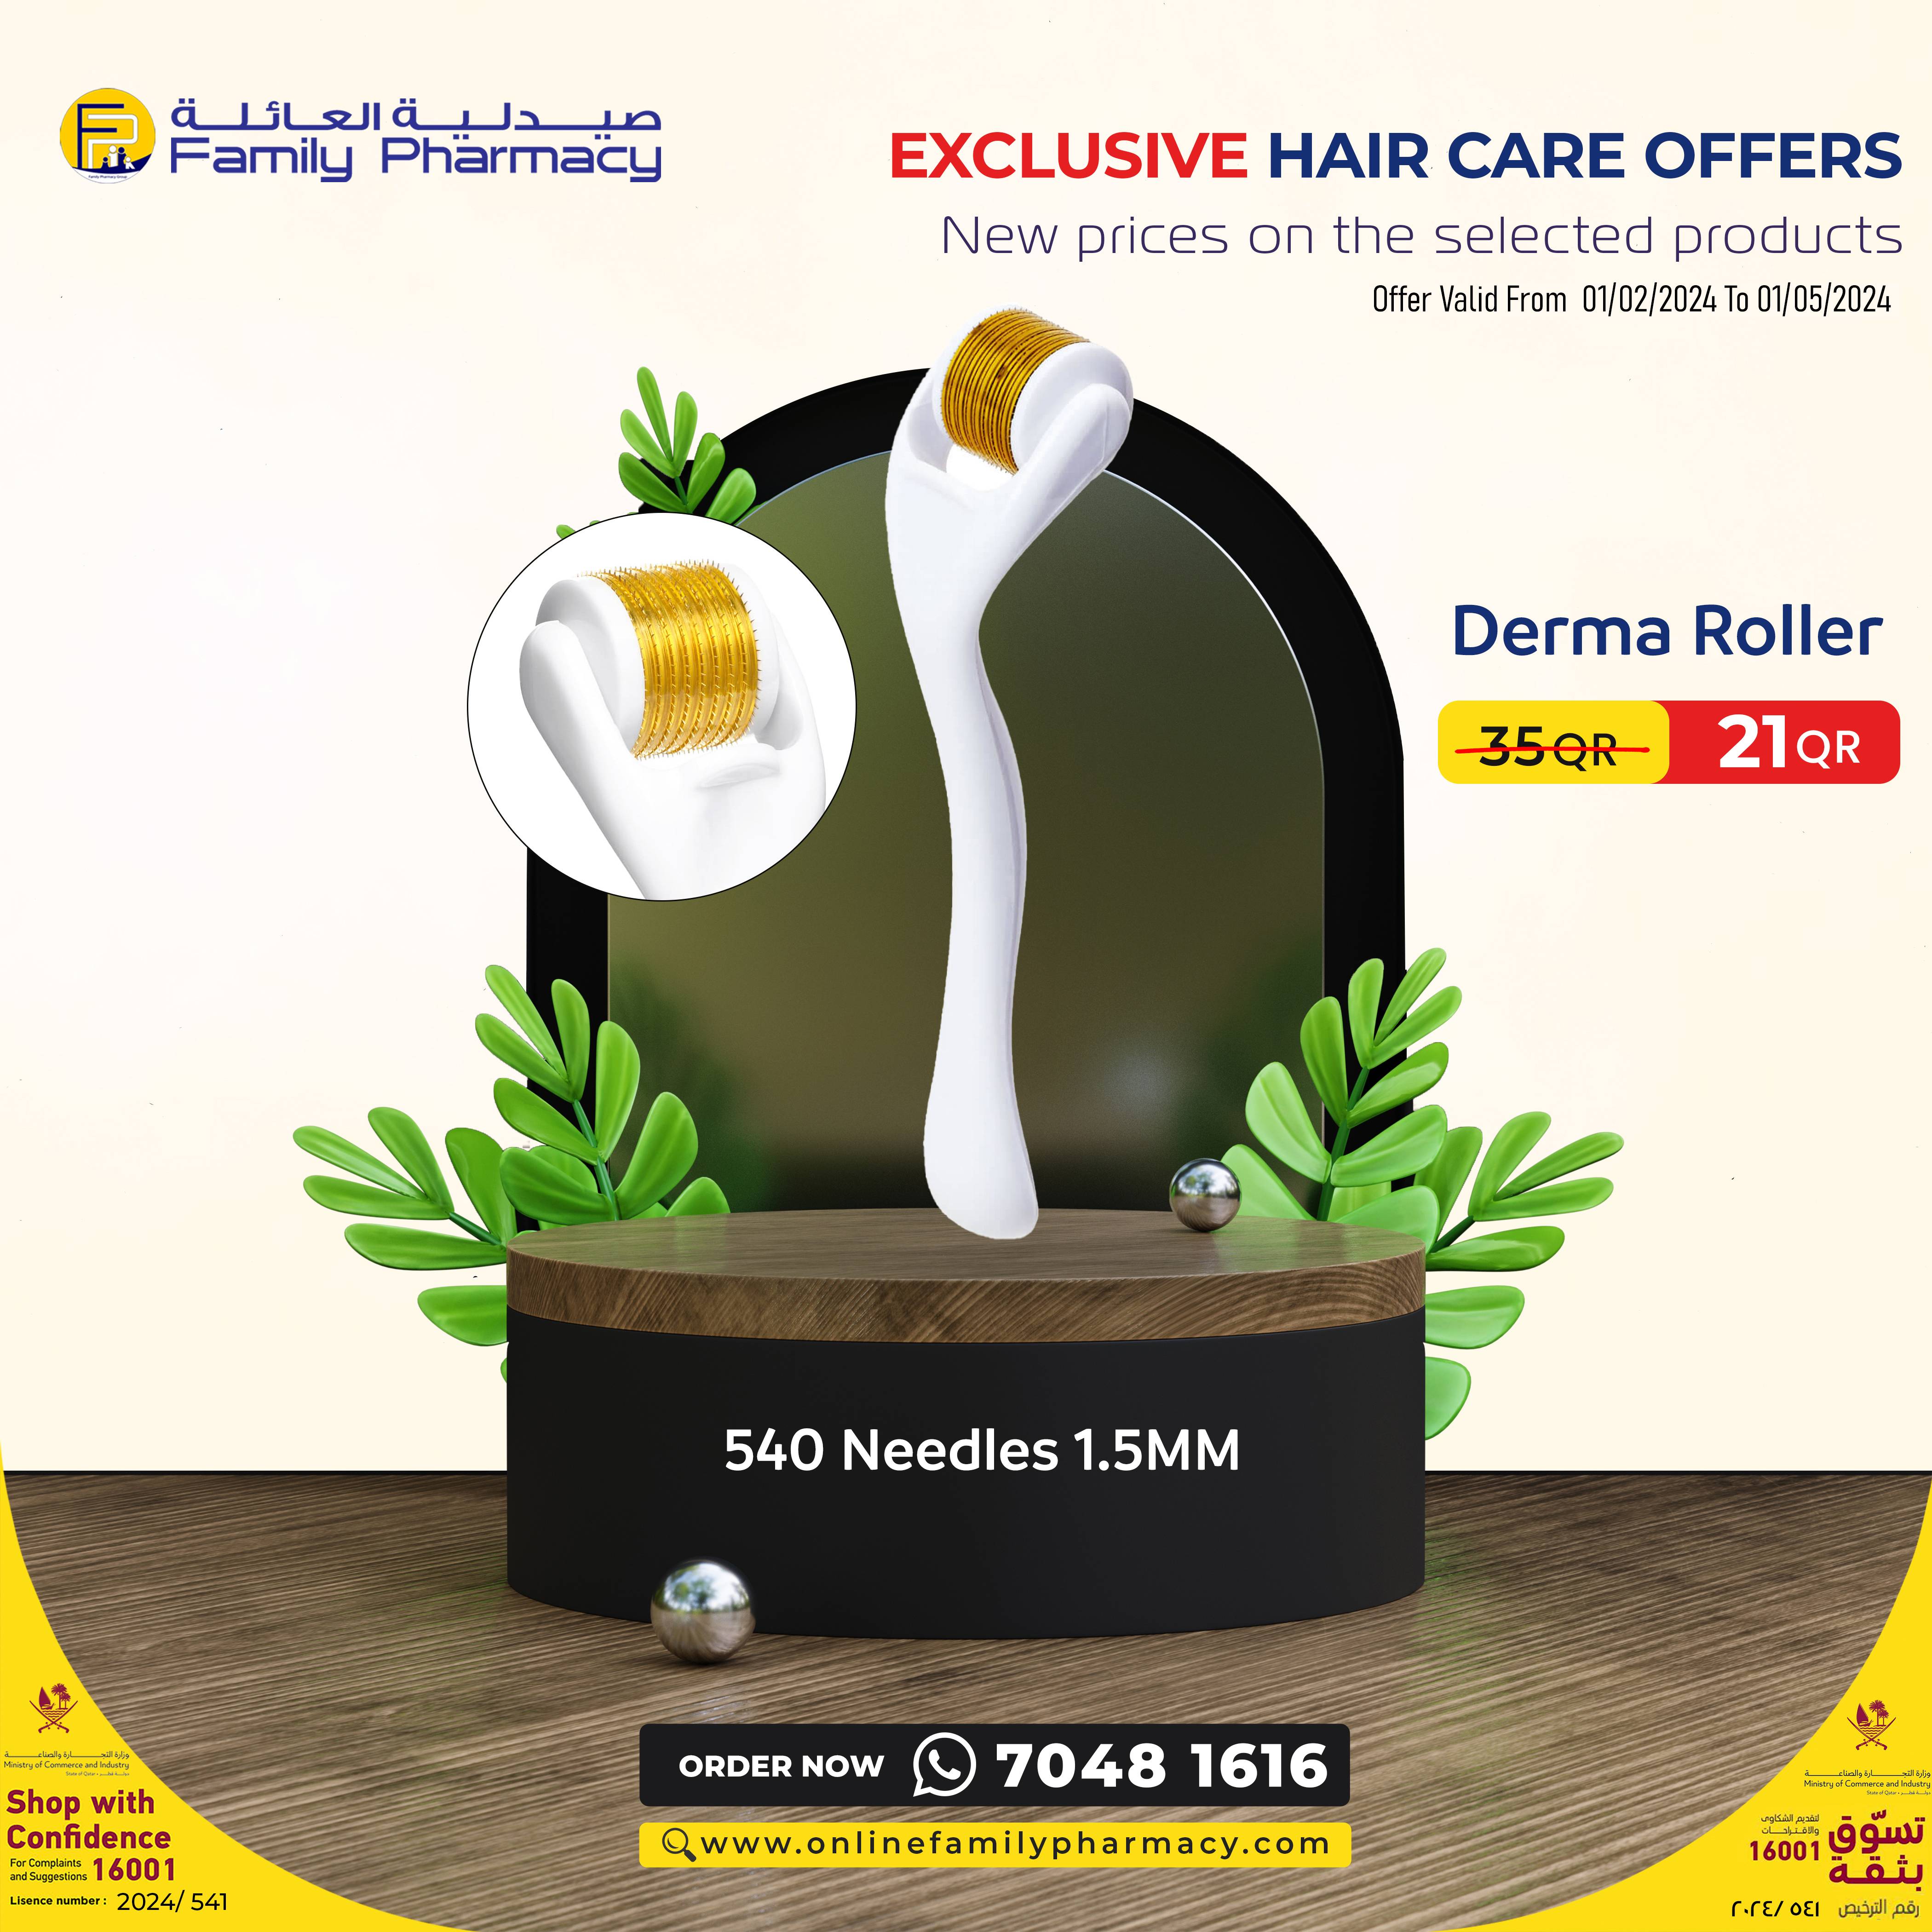 Face Derma Roller-540 Needles-drs 150(1.5 Mm)-beijing Metos(offer) Available at Online Family Pharmacy Qatar Doha